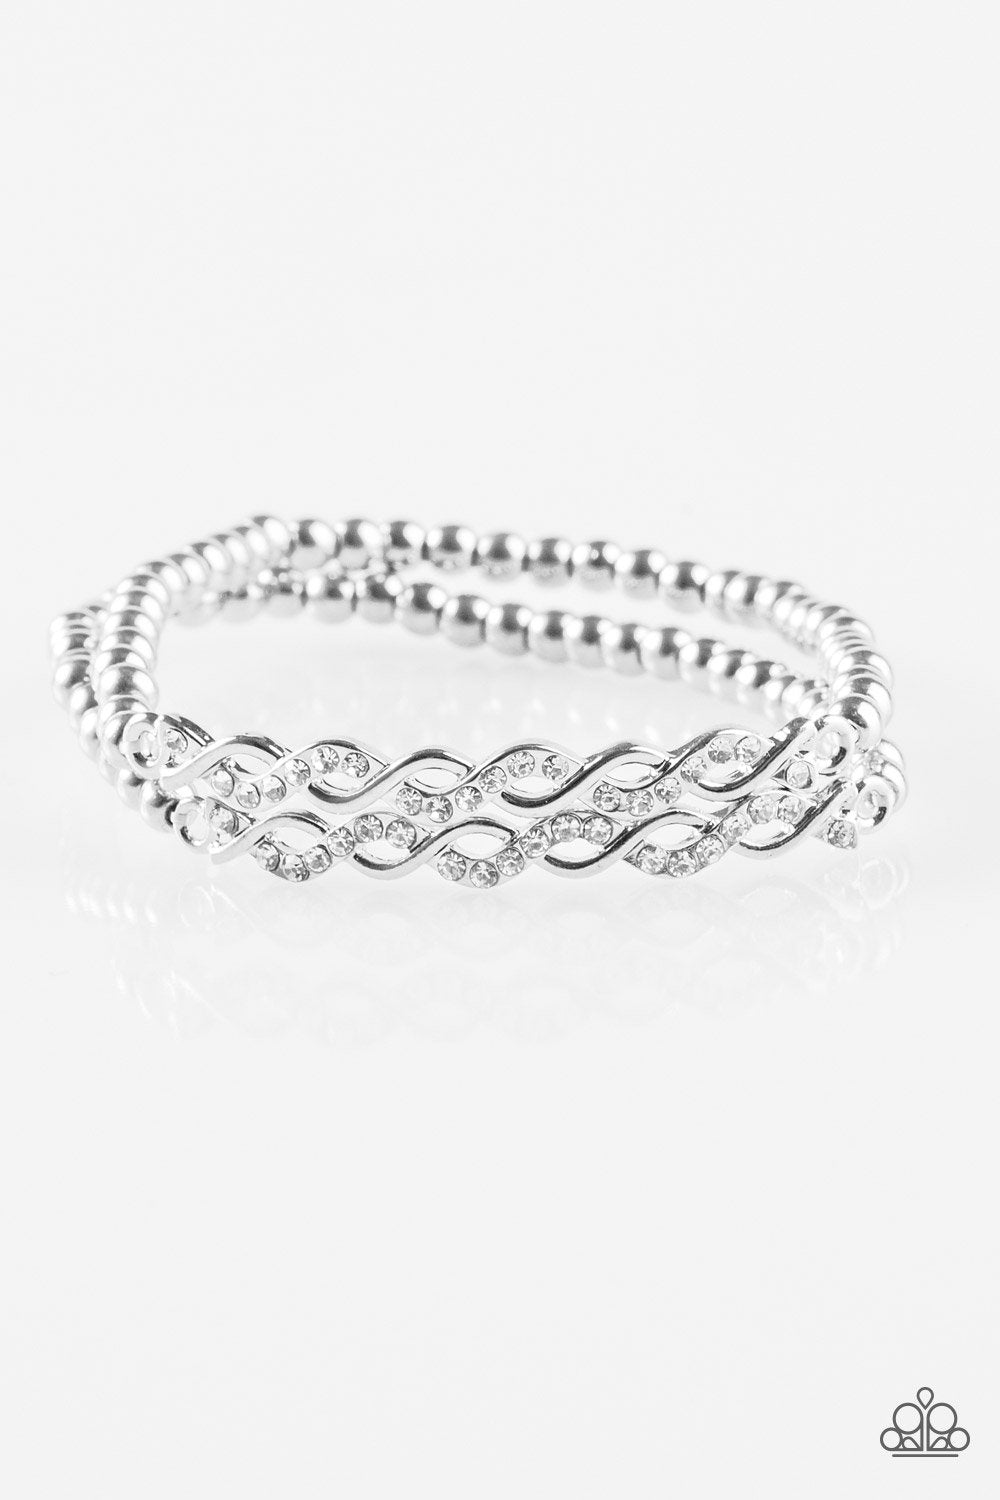 Uptown Utopia Silver and White Bracelet Set - Paparazzi Accessories-CarasShop.com - $5 Jewelry by Cara Jewels